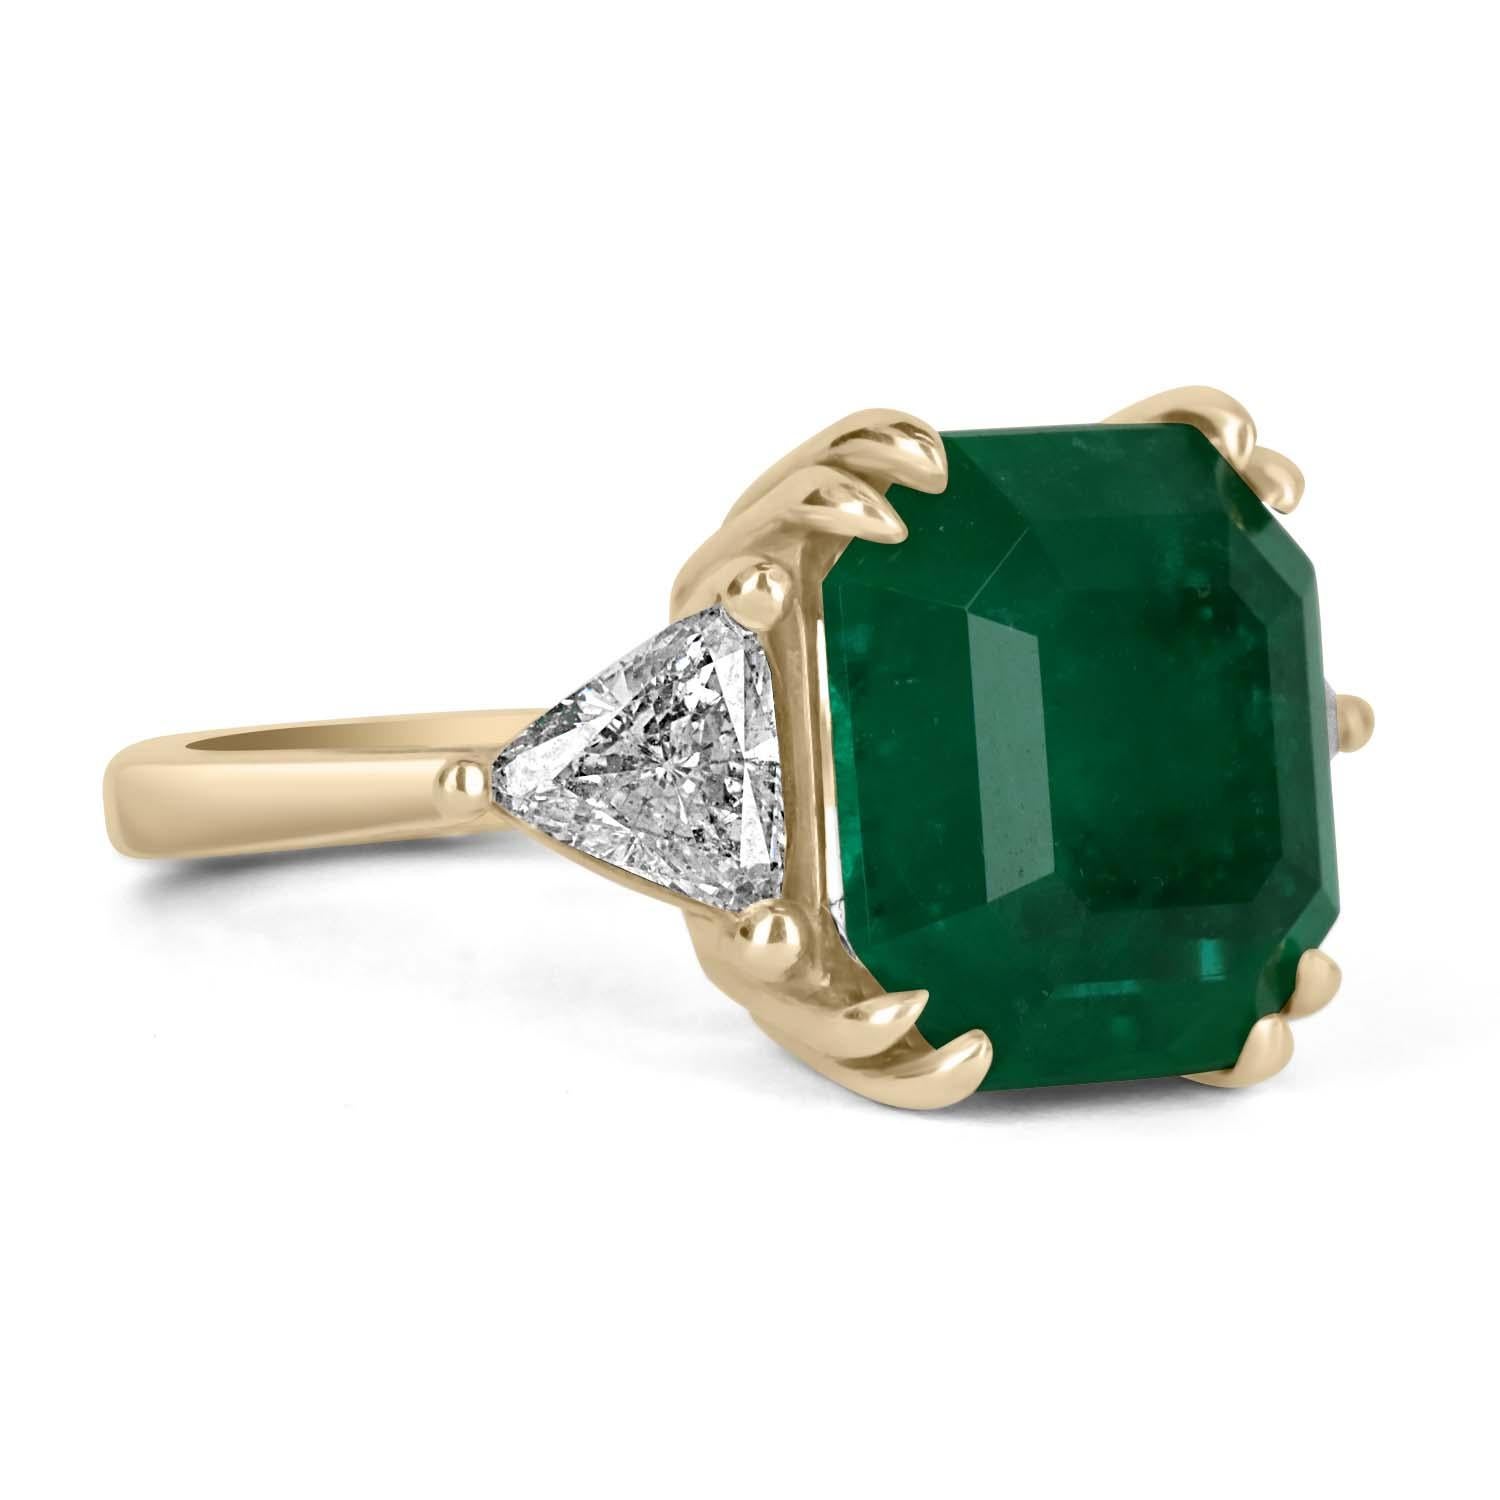 A classic Colombian emerald and diamond engagement, statement, or right-hand ring. Dexterously crafted in 18K gold this ring features a grand 7.04-carat natural Colombian emerald-Asscher cut from the famous Muzo mines. Set in a secure double prong